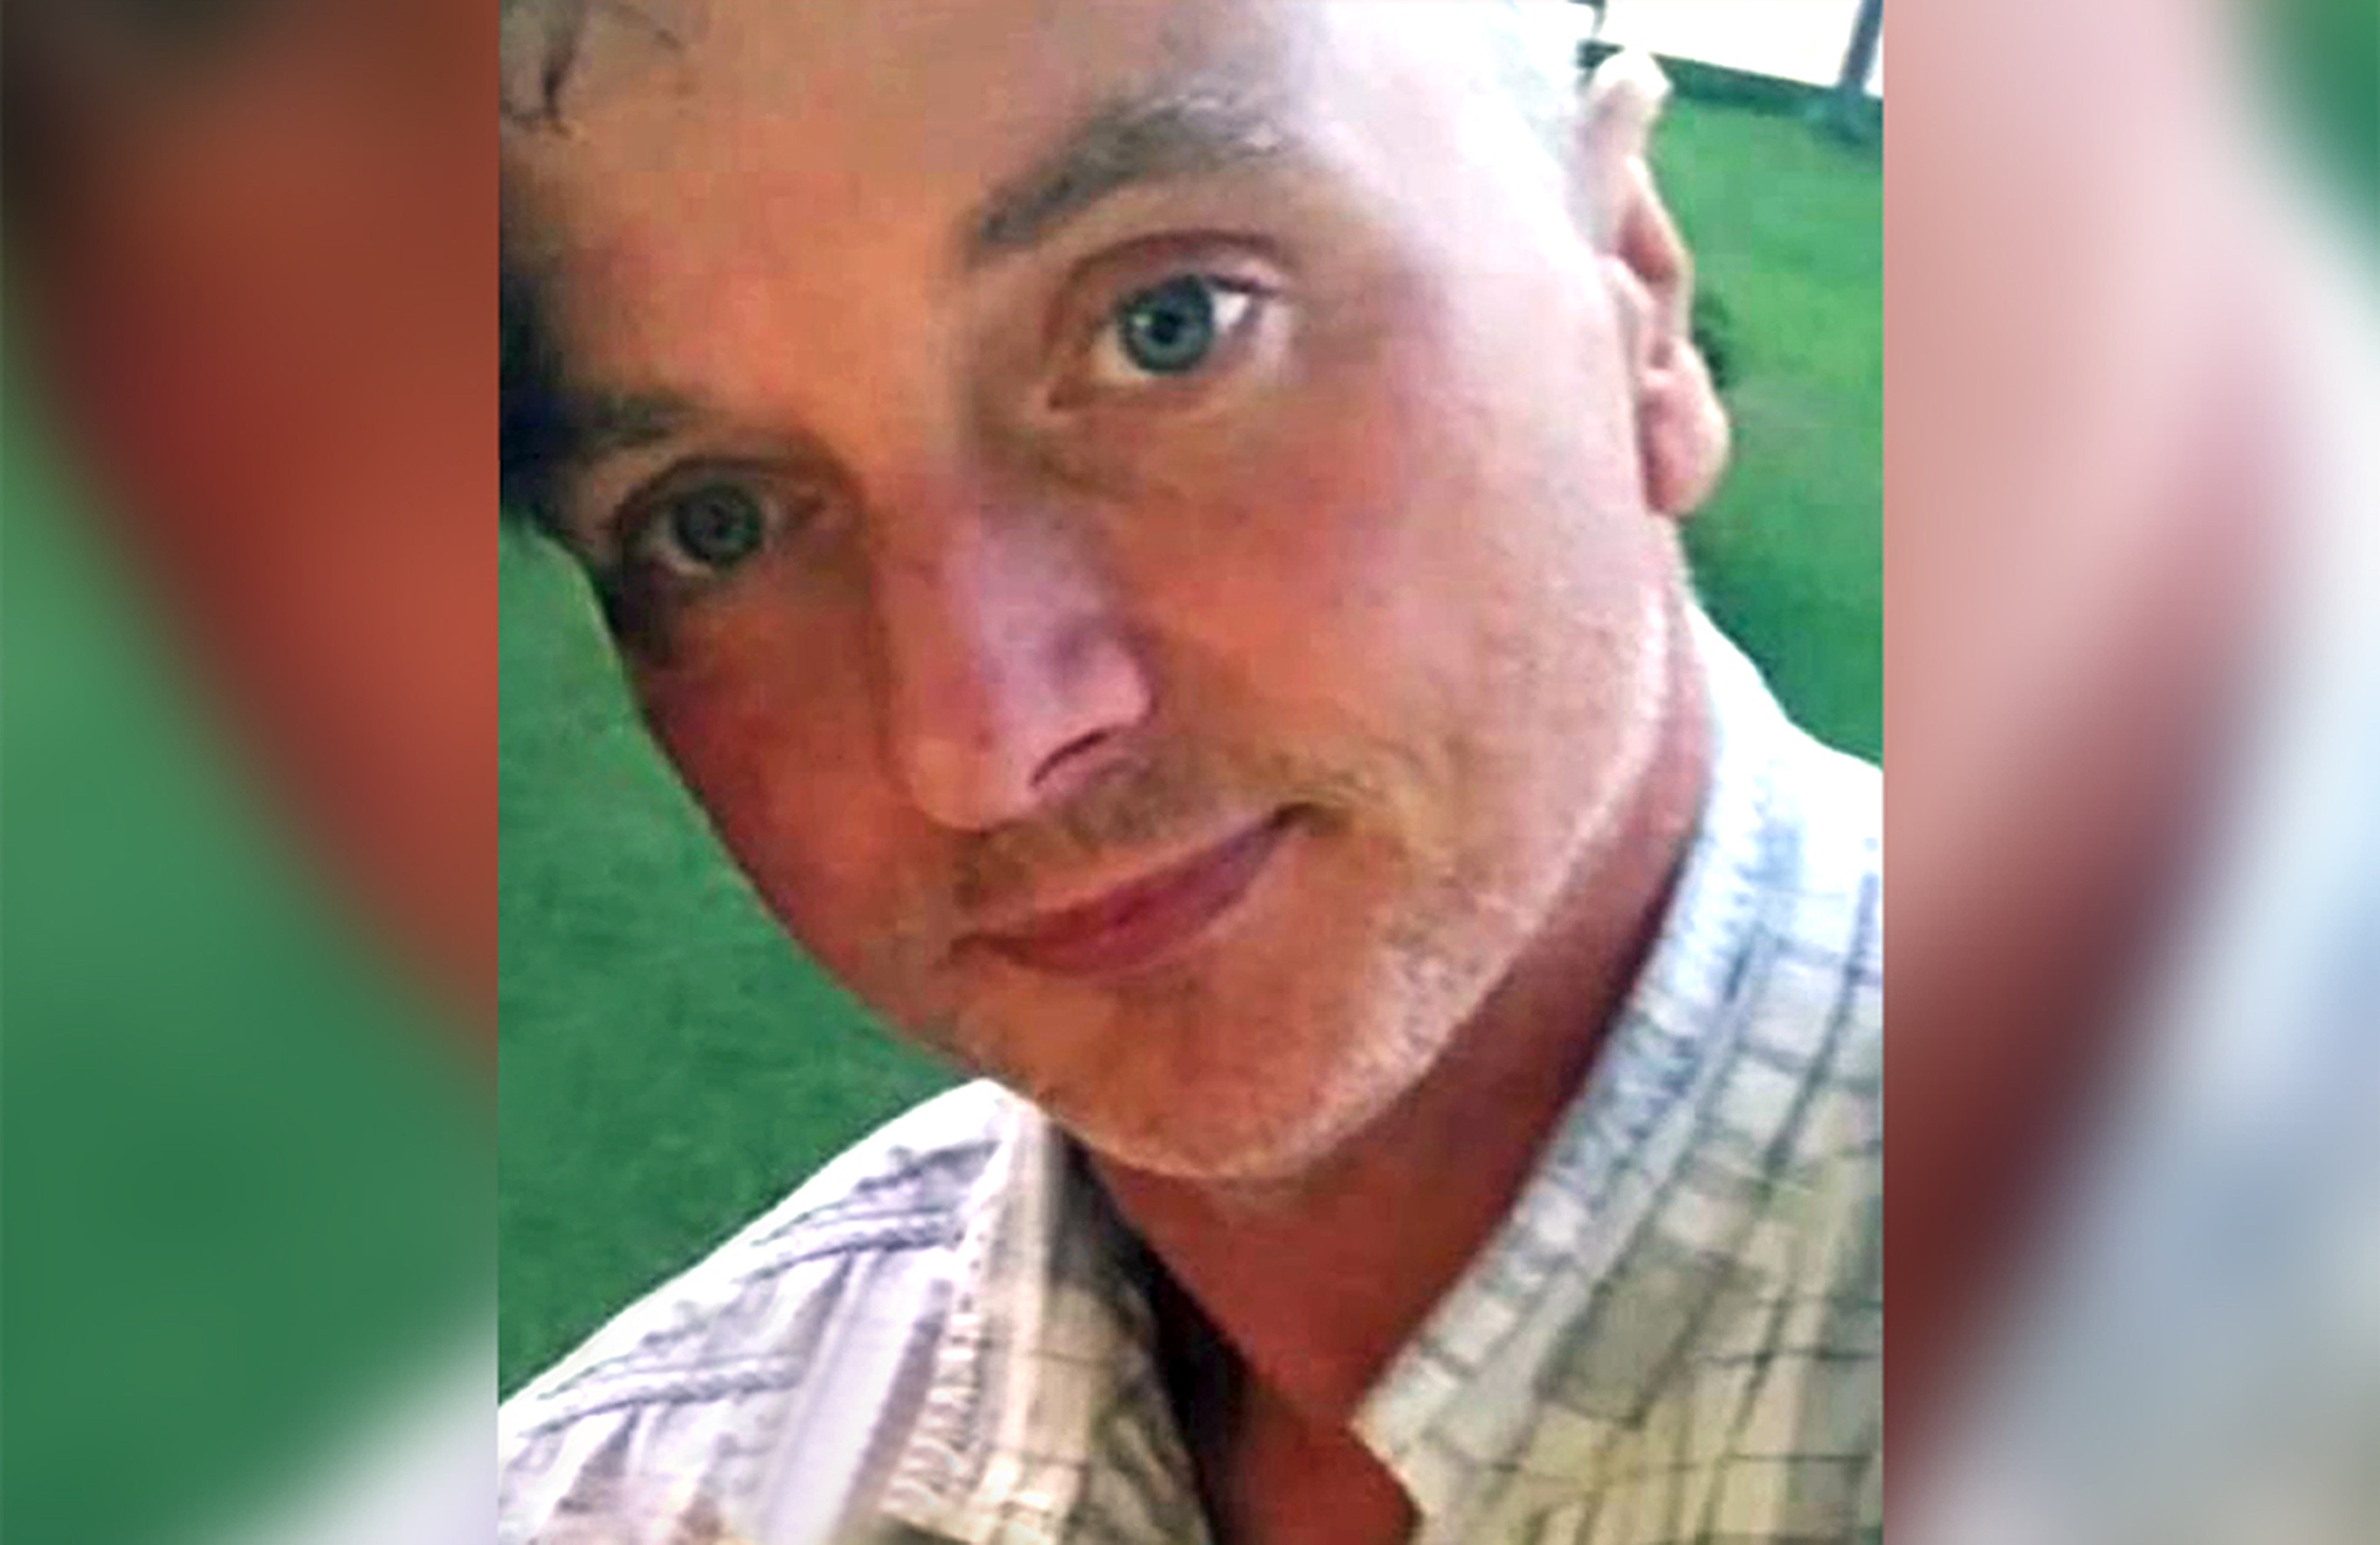 Robert Needham, 42, shot and killed his partner and daughters in March 2020